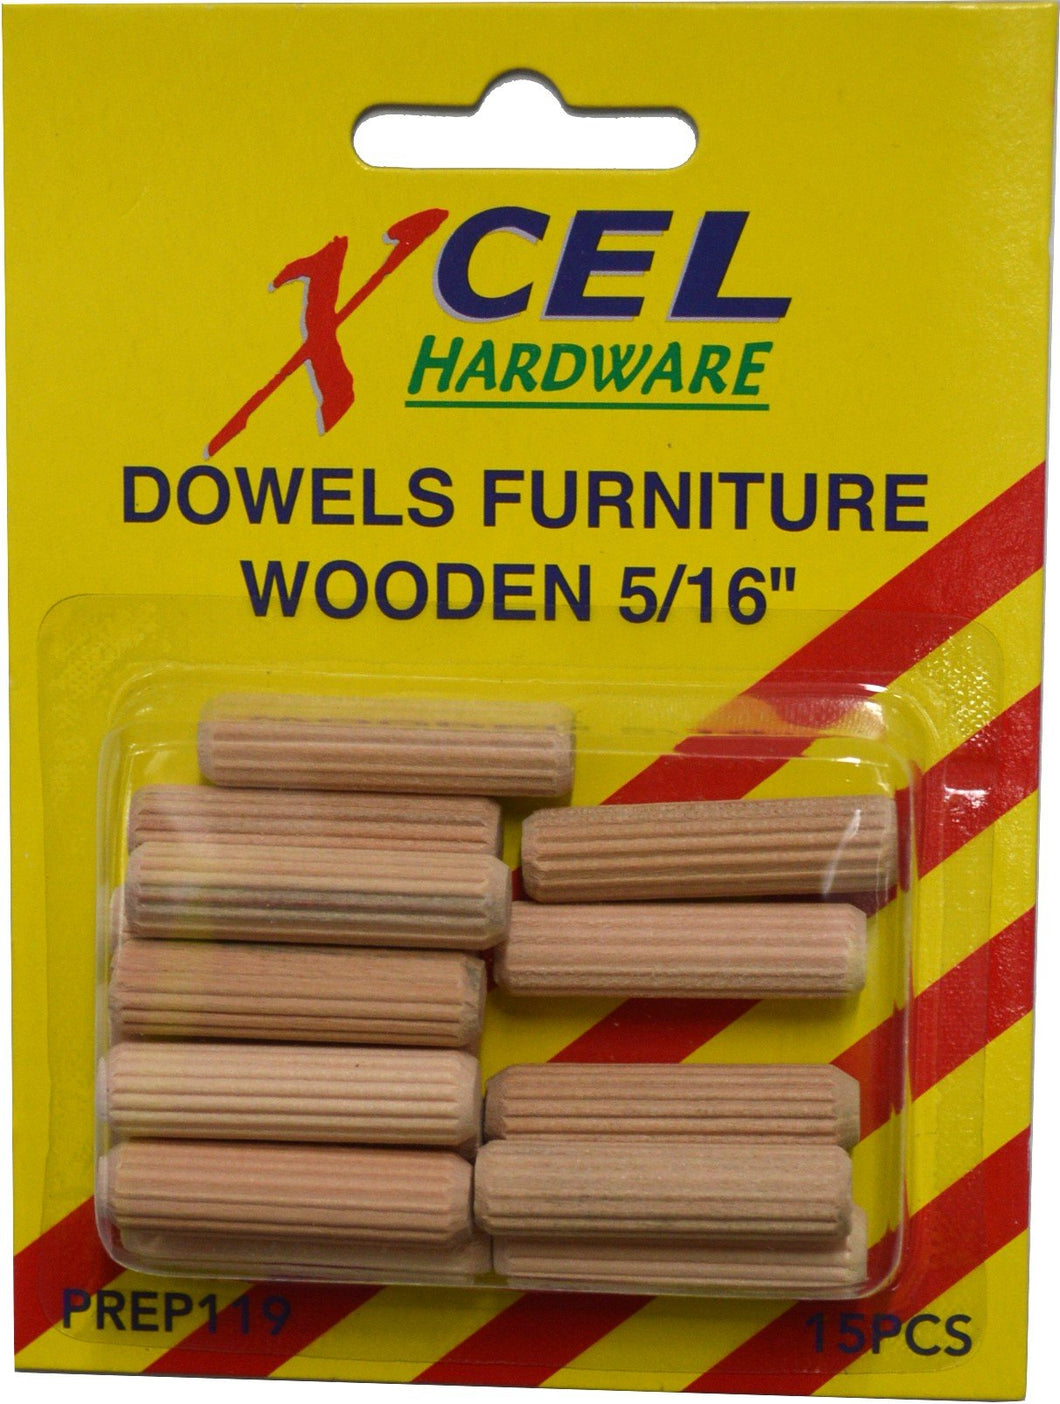 Wooden Furniture Dowels 15-pce 8mm Carded Xcel